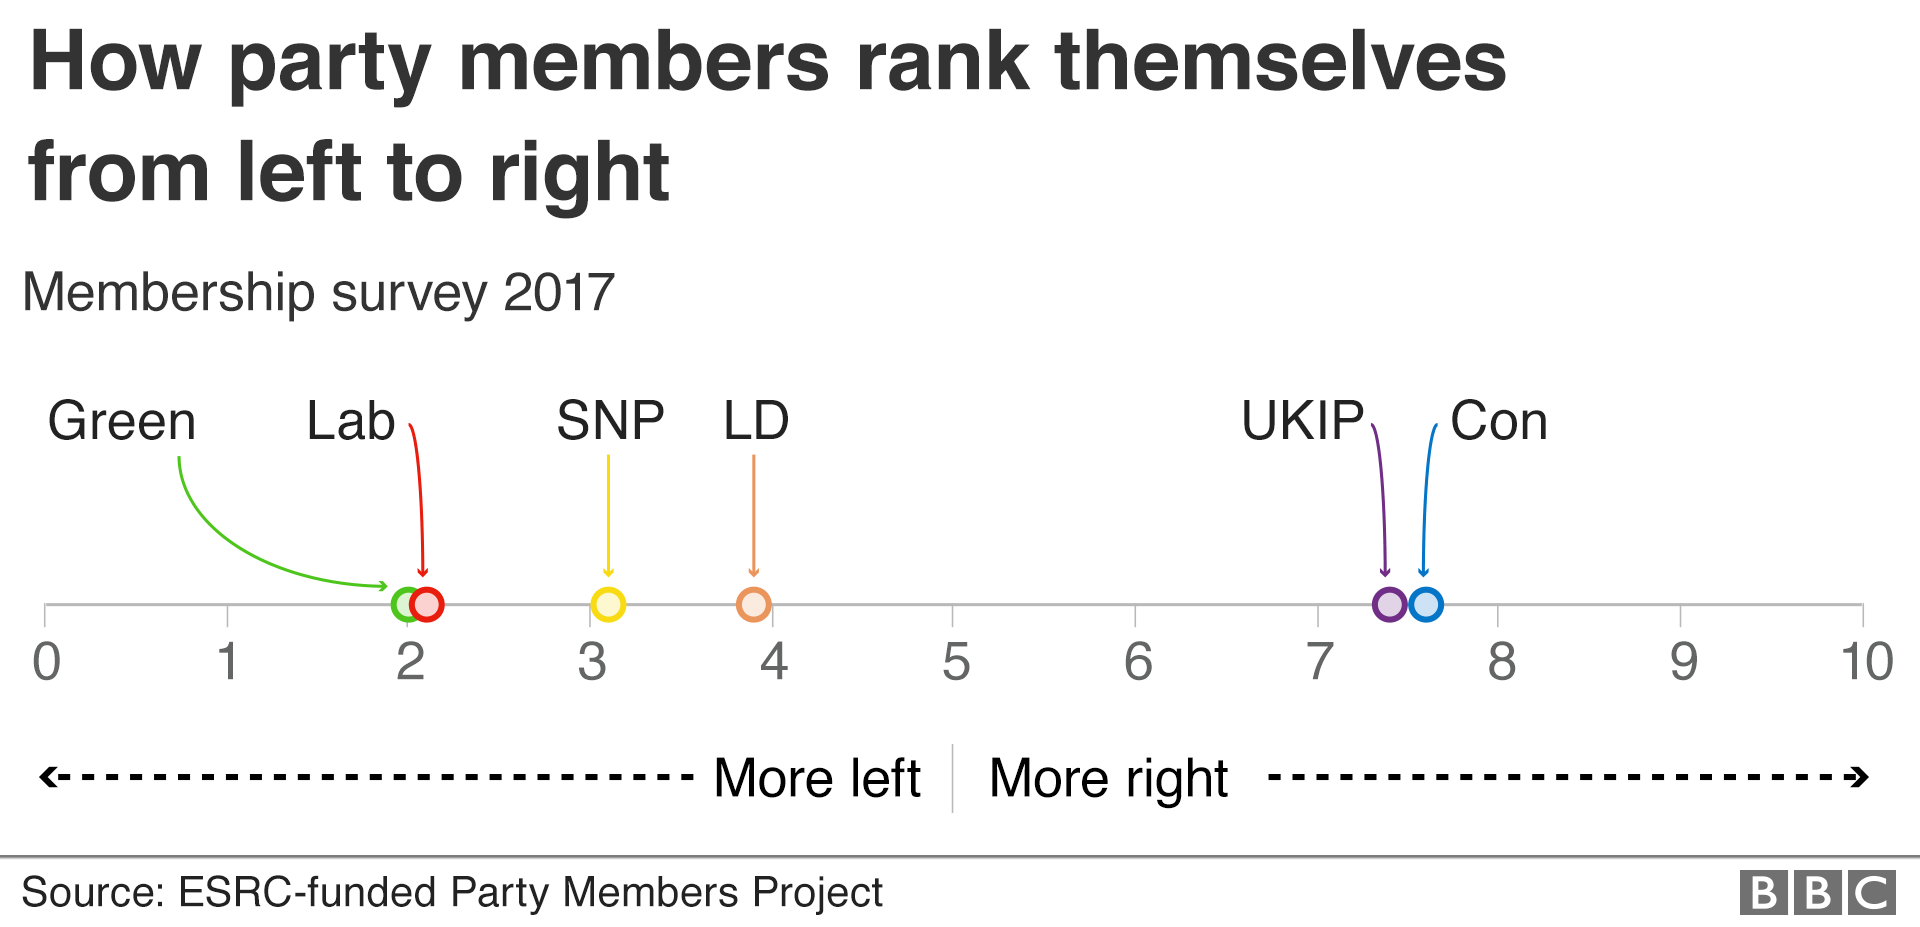 How party members rank themselves from left to right